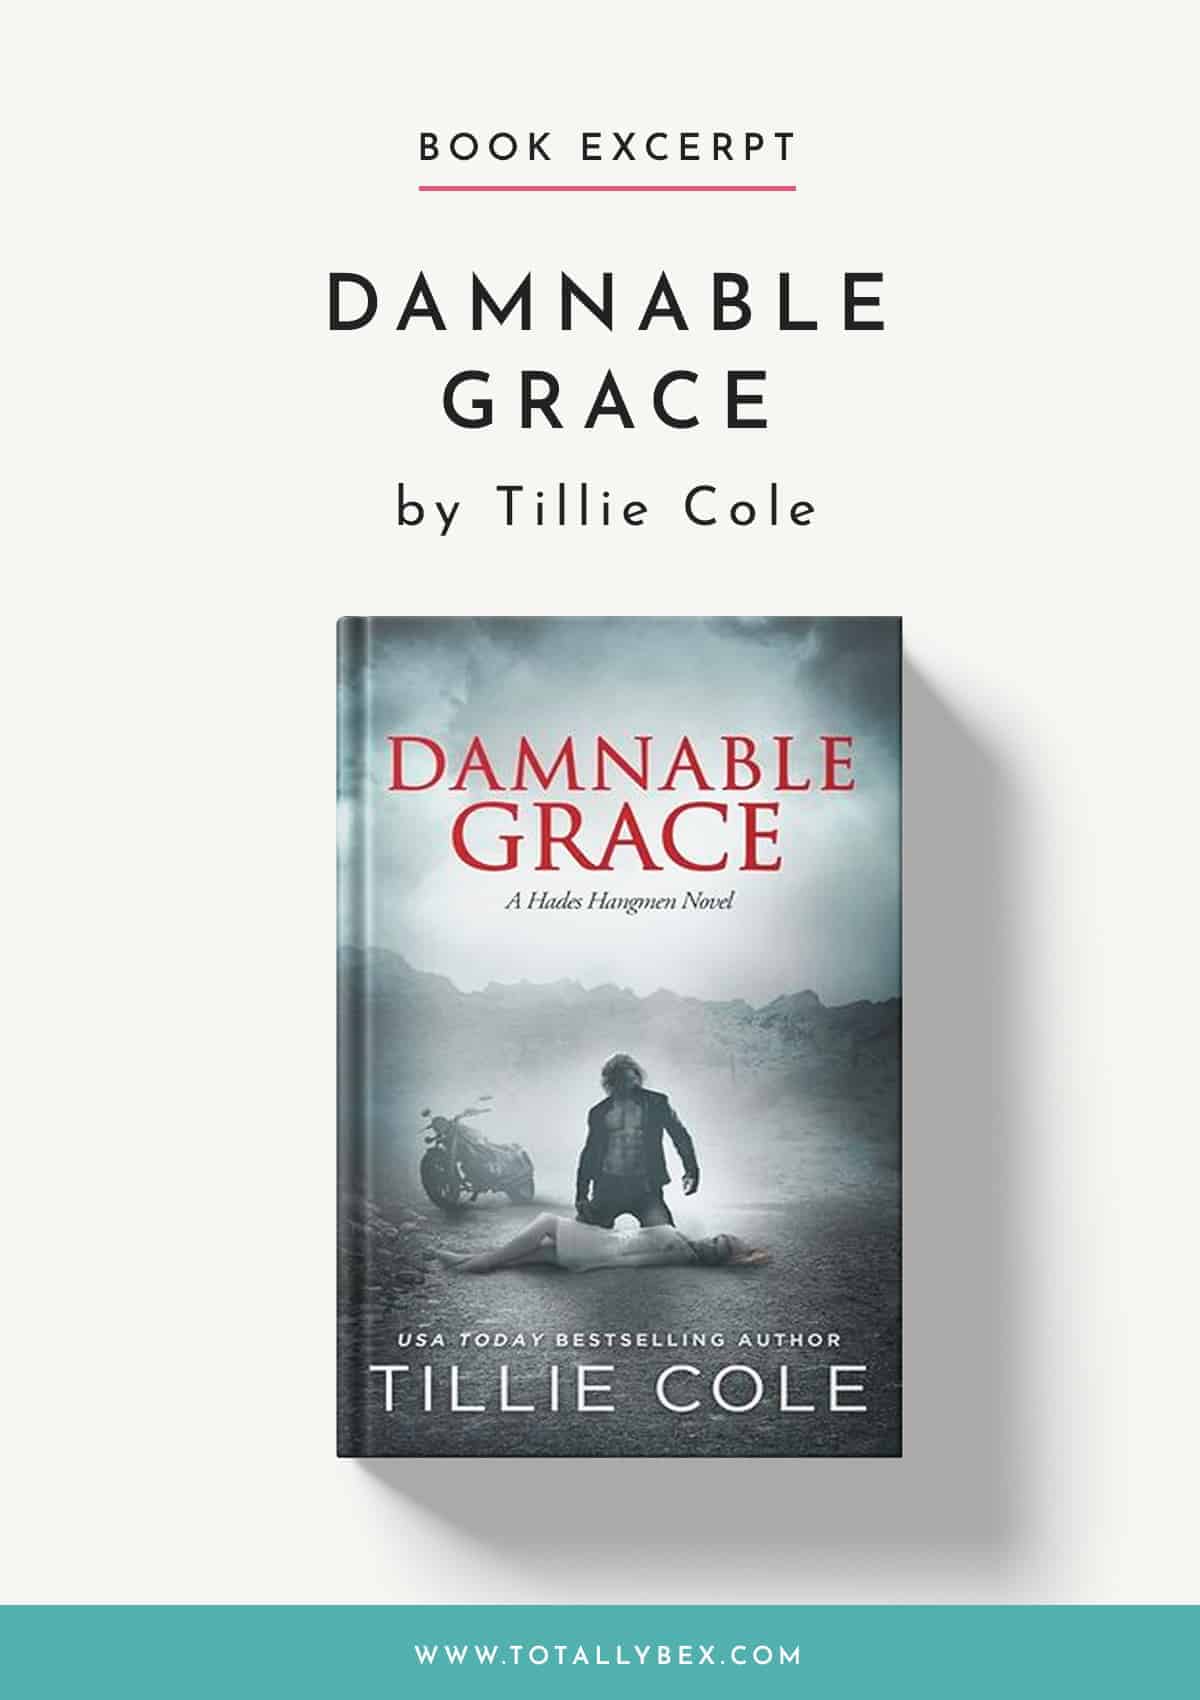 Damnable Grace by Tillie Cole-Book Excerpt